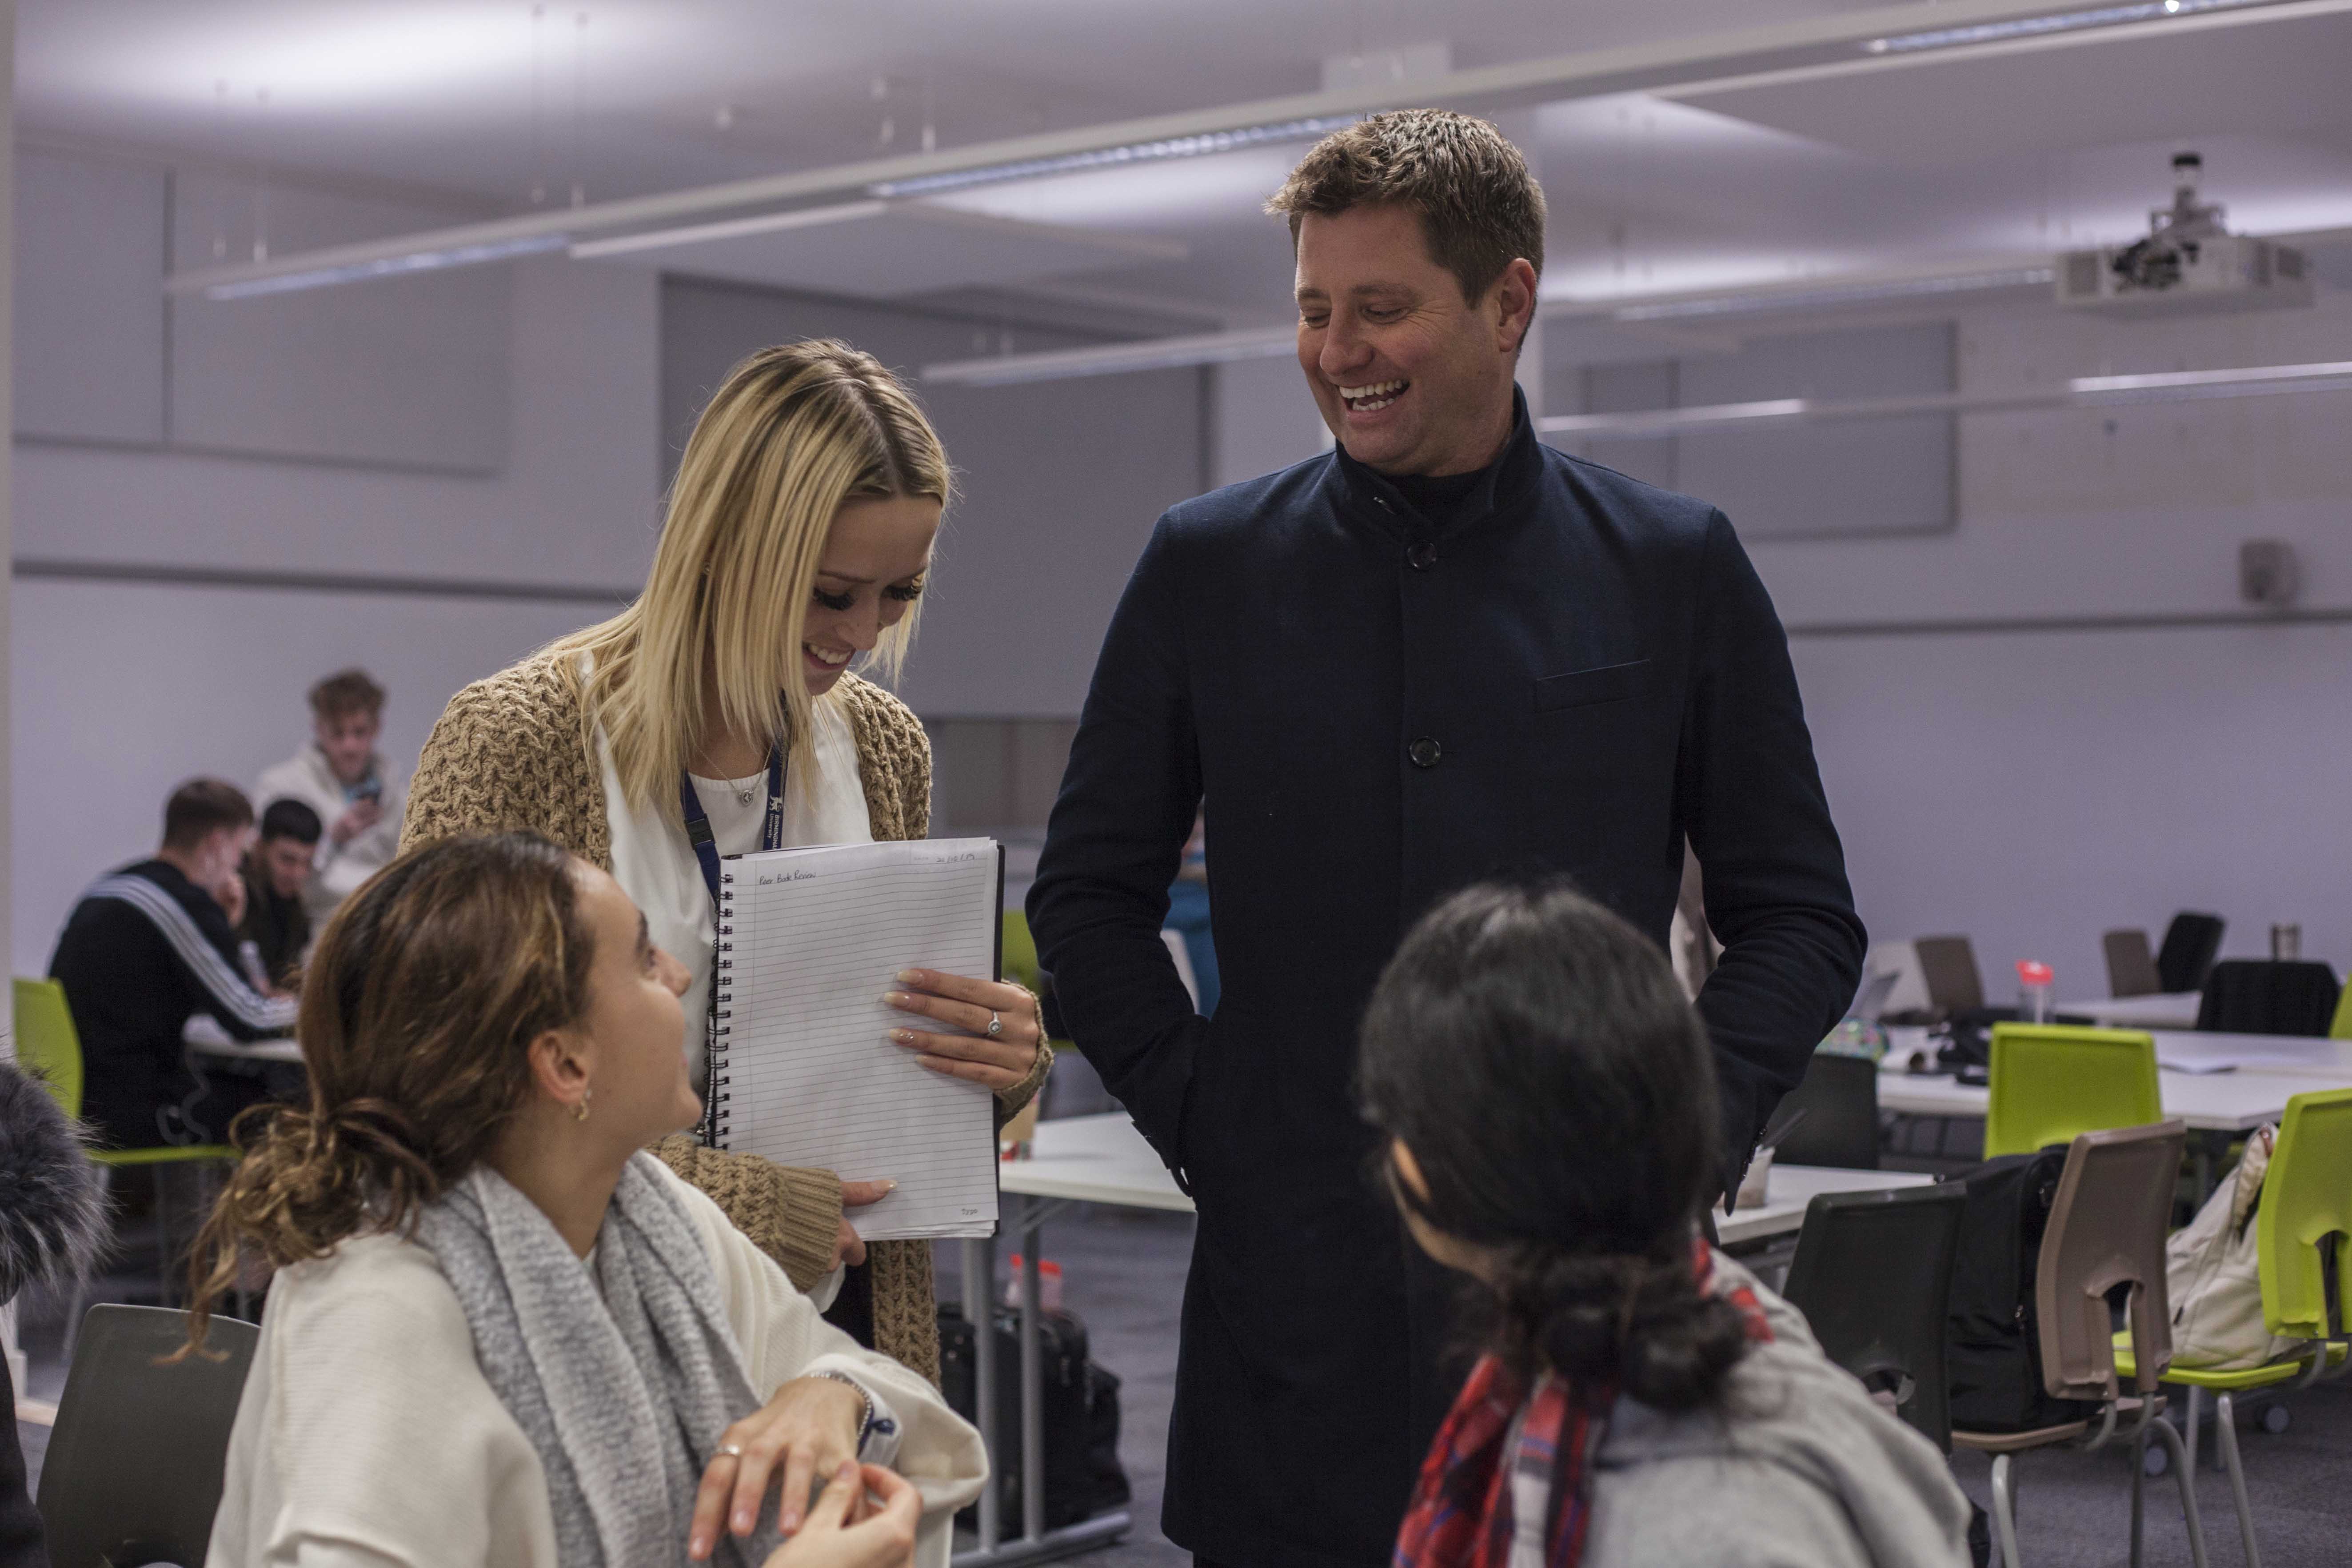 ‘It’s time for the state to start building again,’ says TV architect George Clarke as he’s named Visiting Professor at Birmingham City University @BCUPressOffice